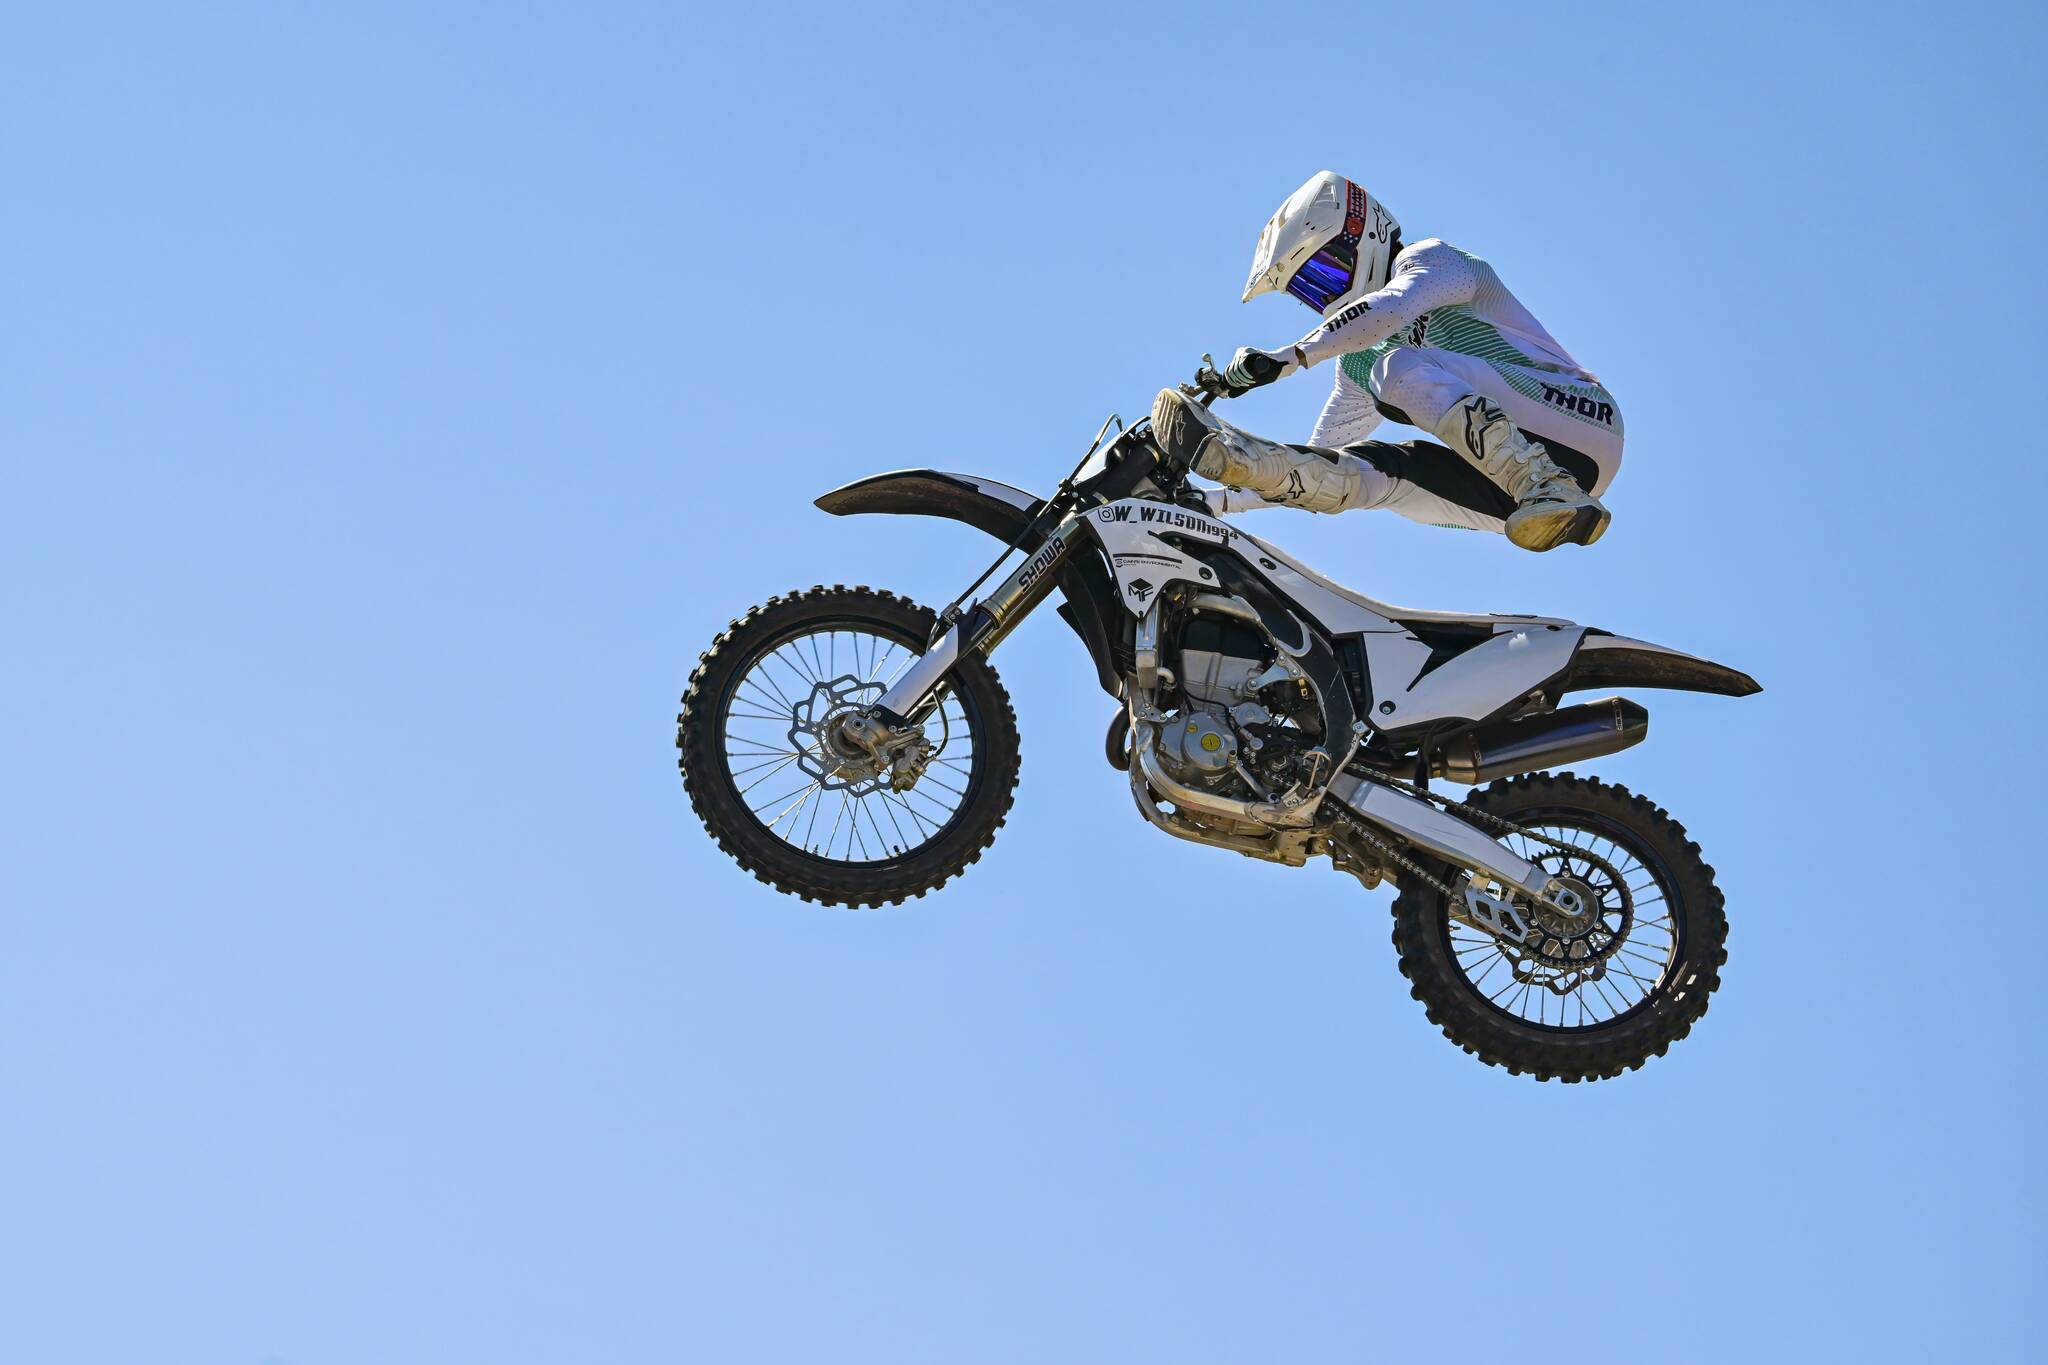 There are numerous entertainment acts like FMX shows around the grounds. Photo by Vic Wright